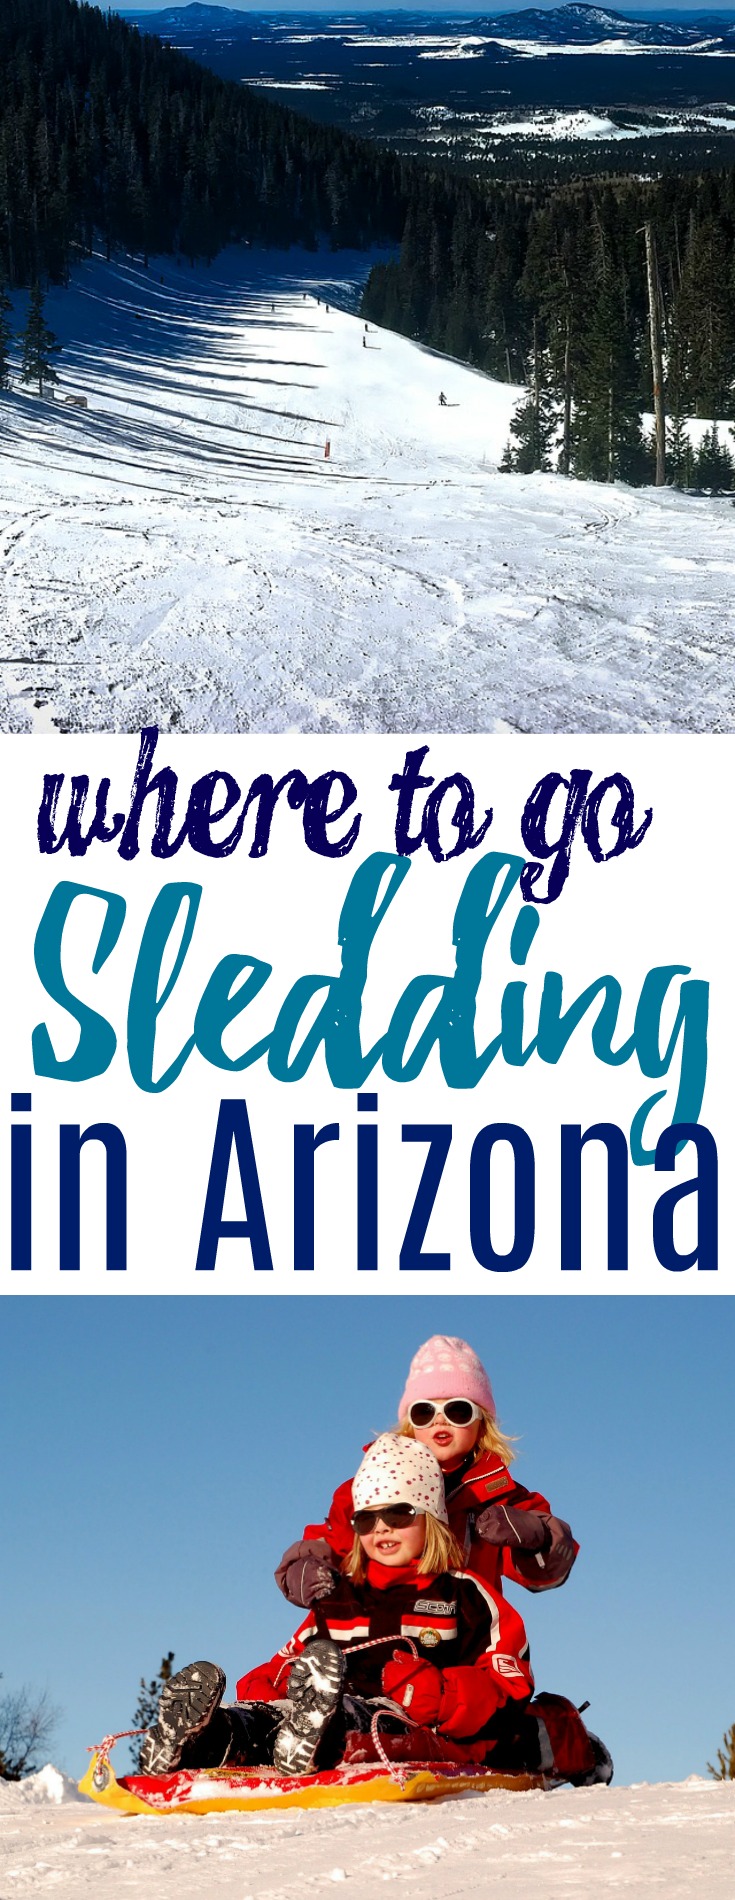 Arizona winters can be a huge relief after a long summer of hot temps. Here are some of the best places to go sledding in Arizona with the family!